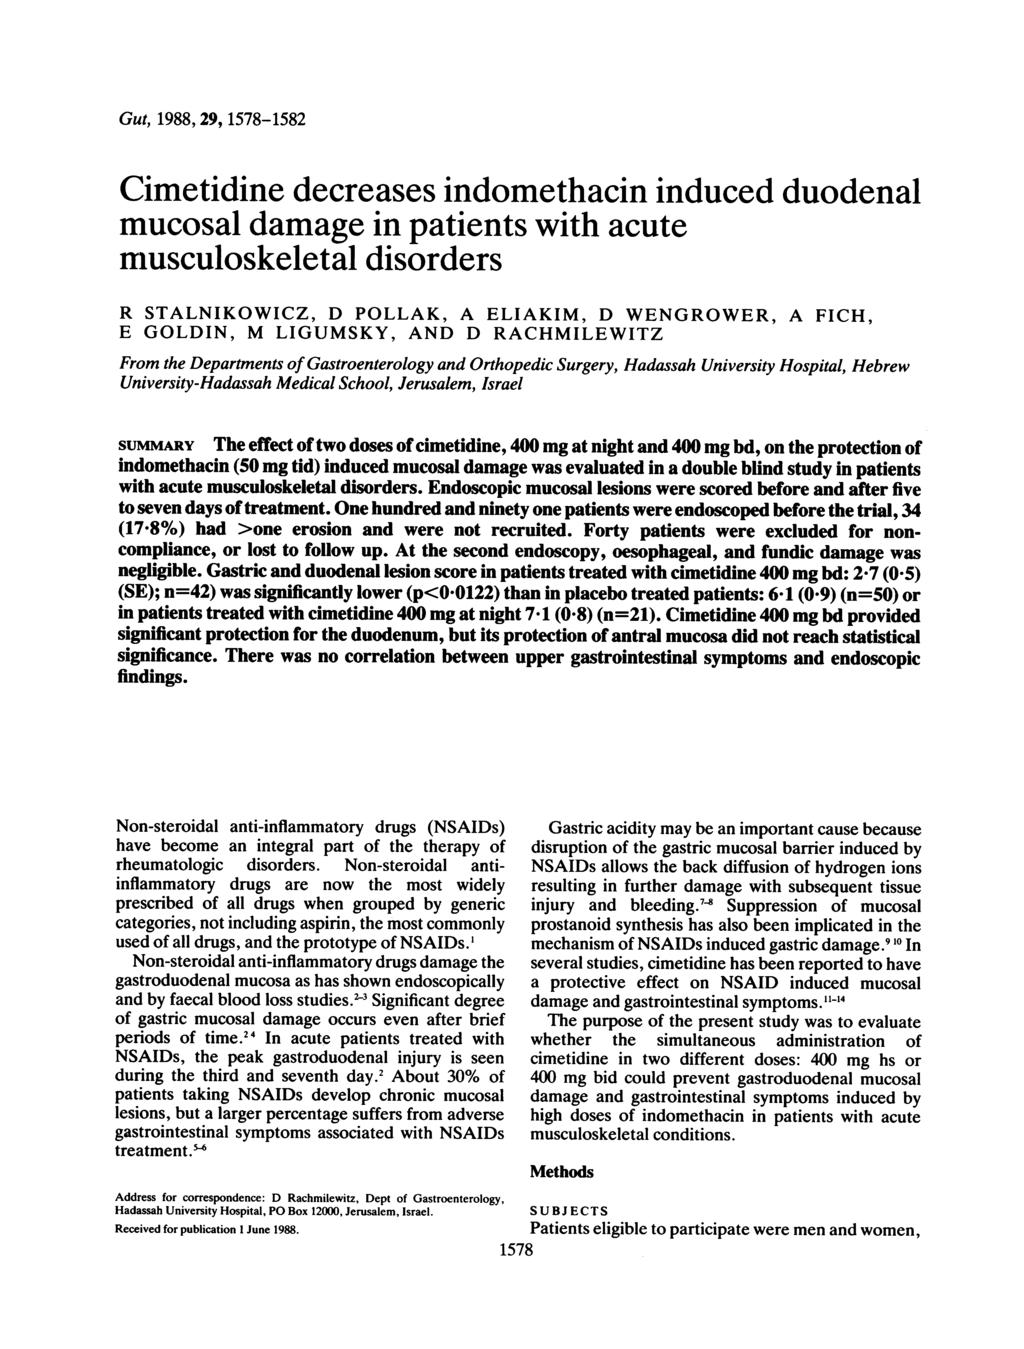 Gut, 1988, 29, 1578-1582 Cimetidine decreases indomethacin induced duodenal mucosal damage in patients with acute musculoskeletal disorders R STALNIKOWICZ, D POLLAK, A ELIAKIM, D WENGROWER, A FICH, E